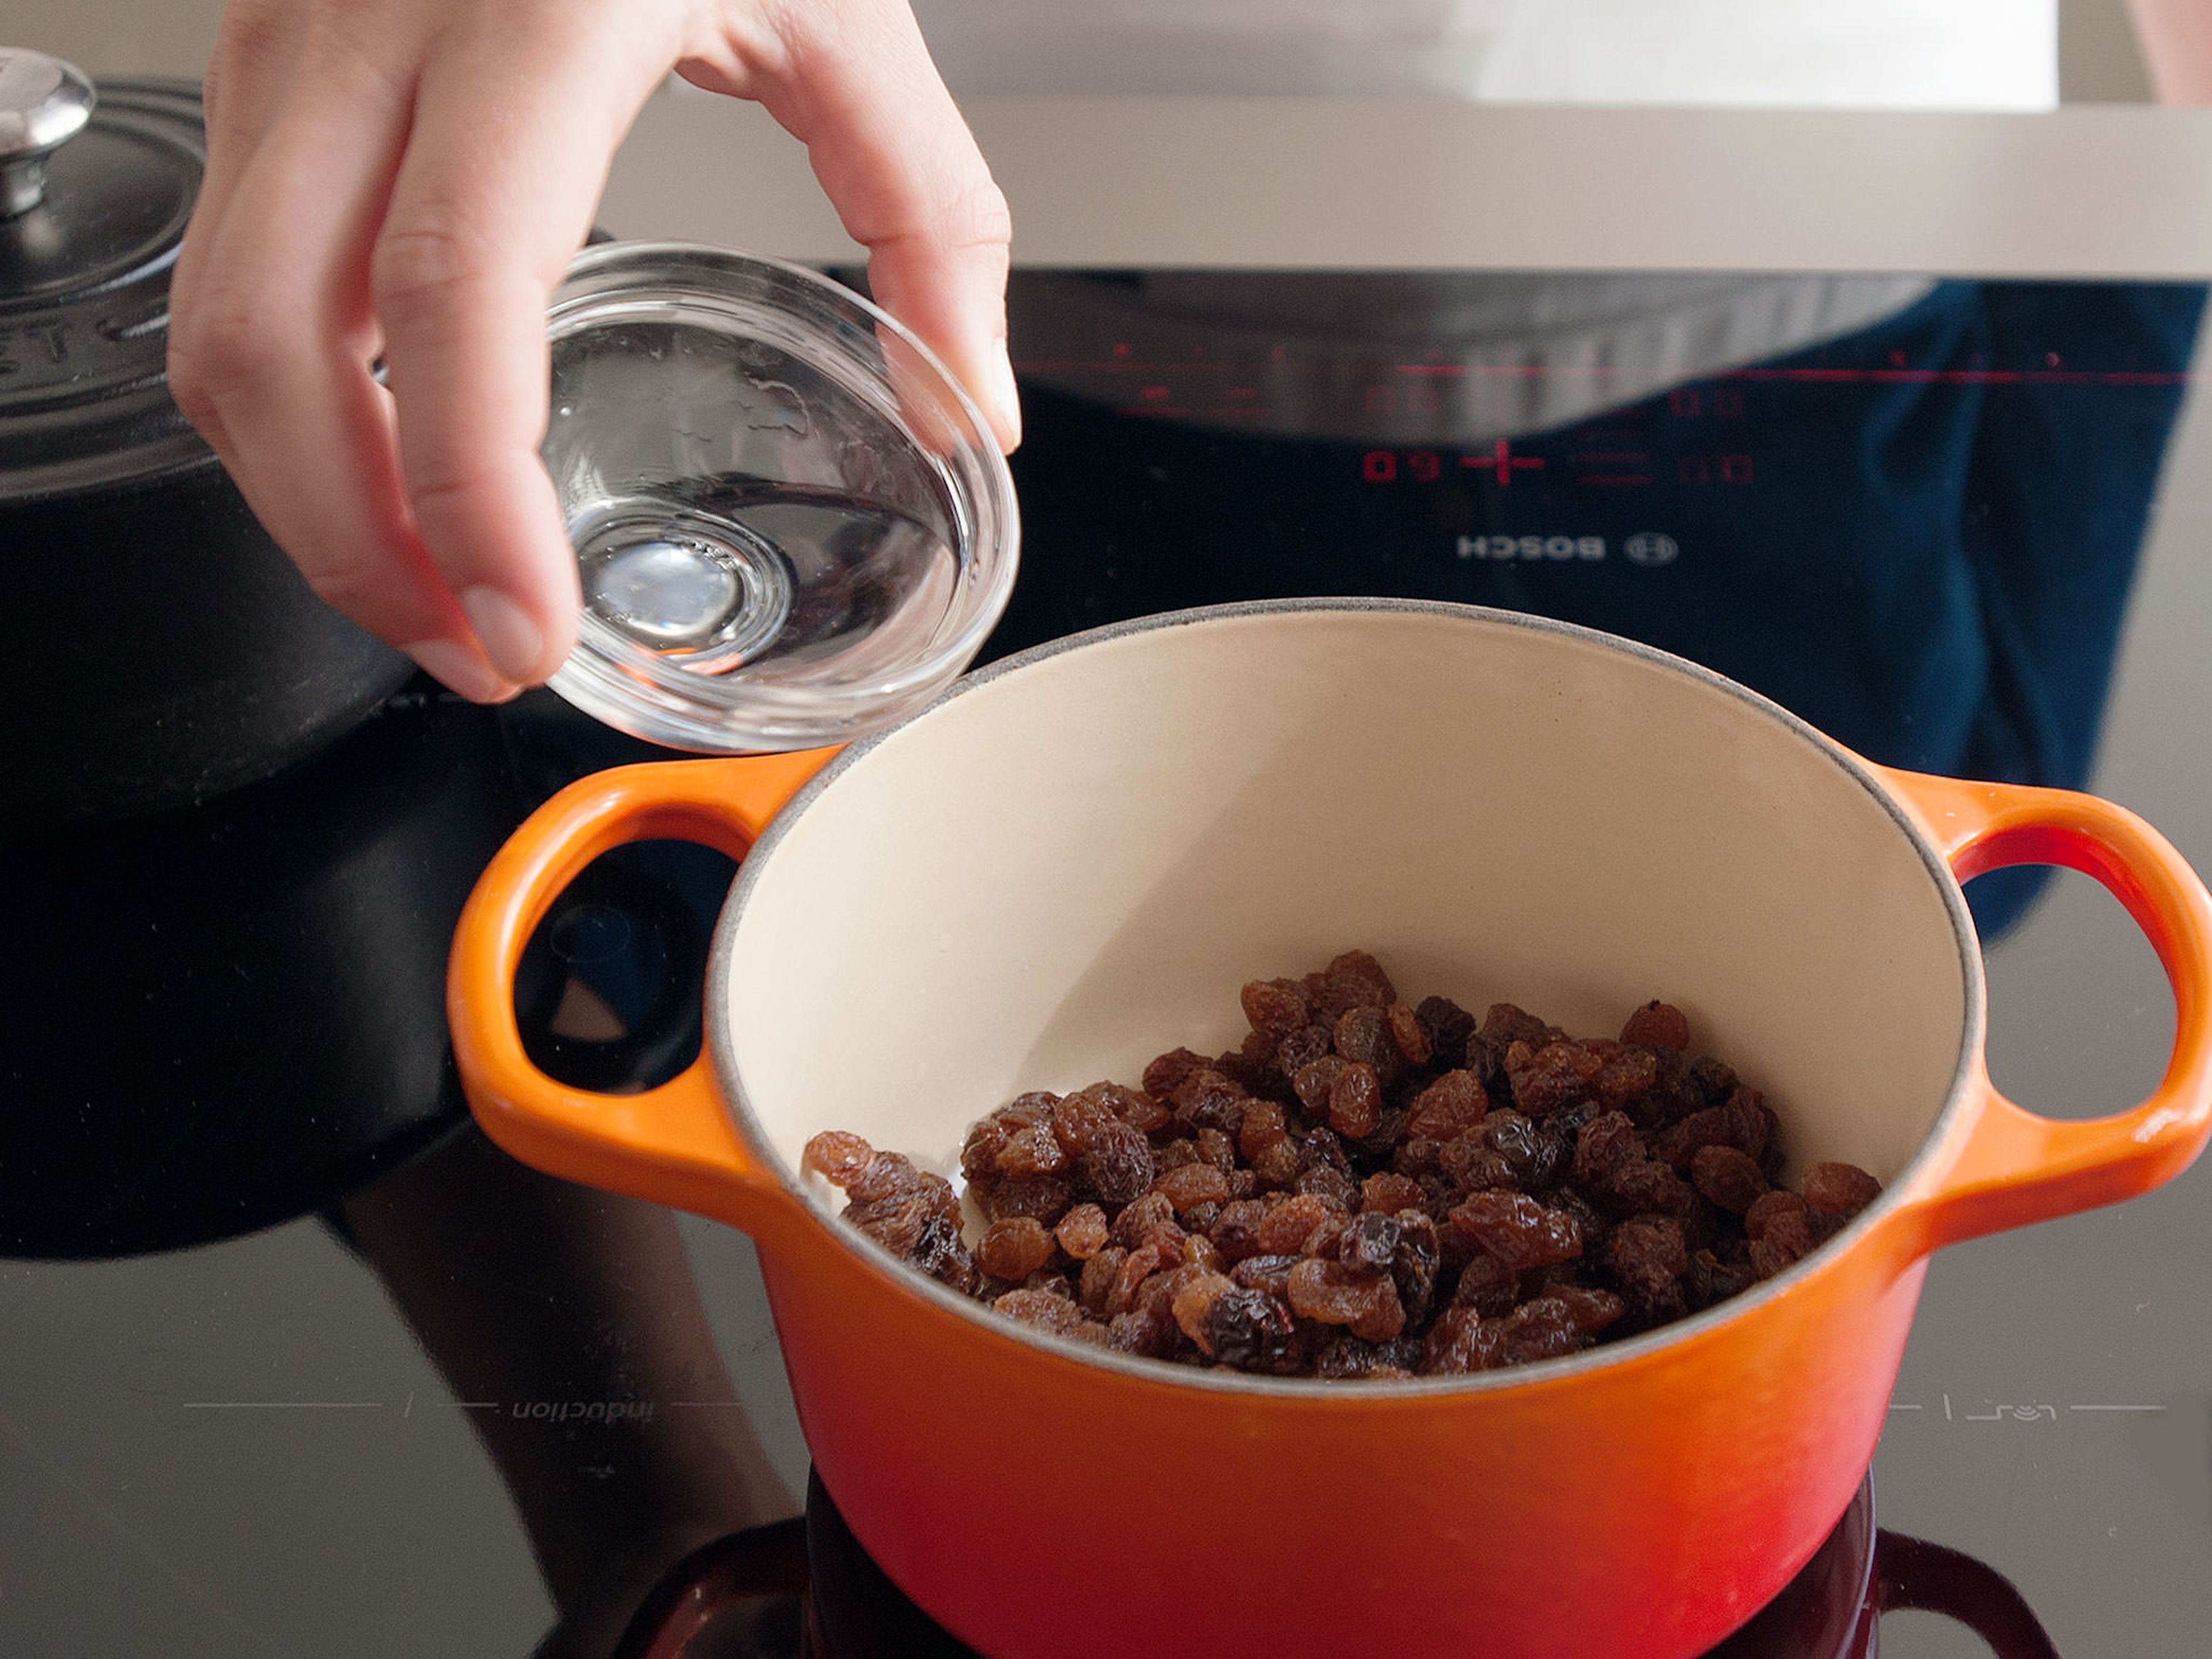 In a small saucepan, combine raisins, rum, and water. Bring to a simmer, stir well, then remove from heat and leave to plump and absorb the liquid as they cool.  Slice candied orange peel and split and scrape the vanilla bean; set aside.